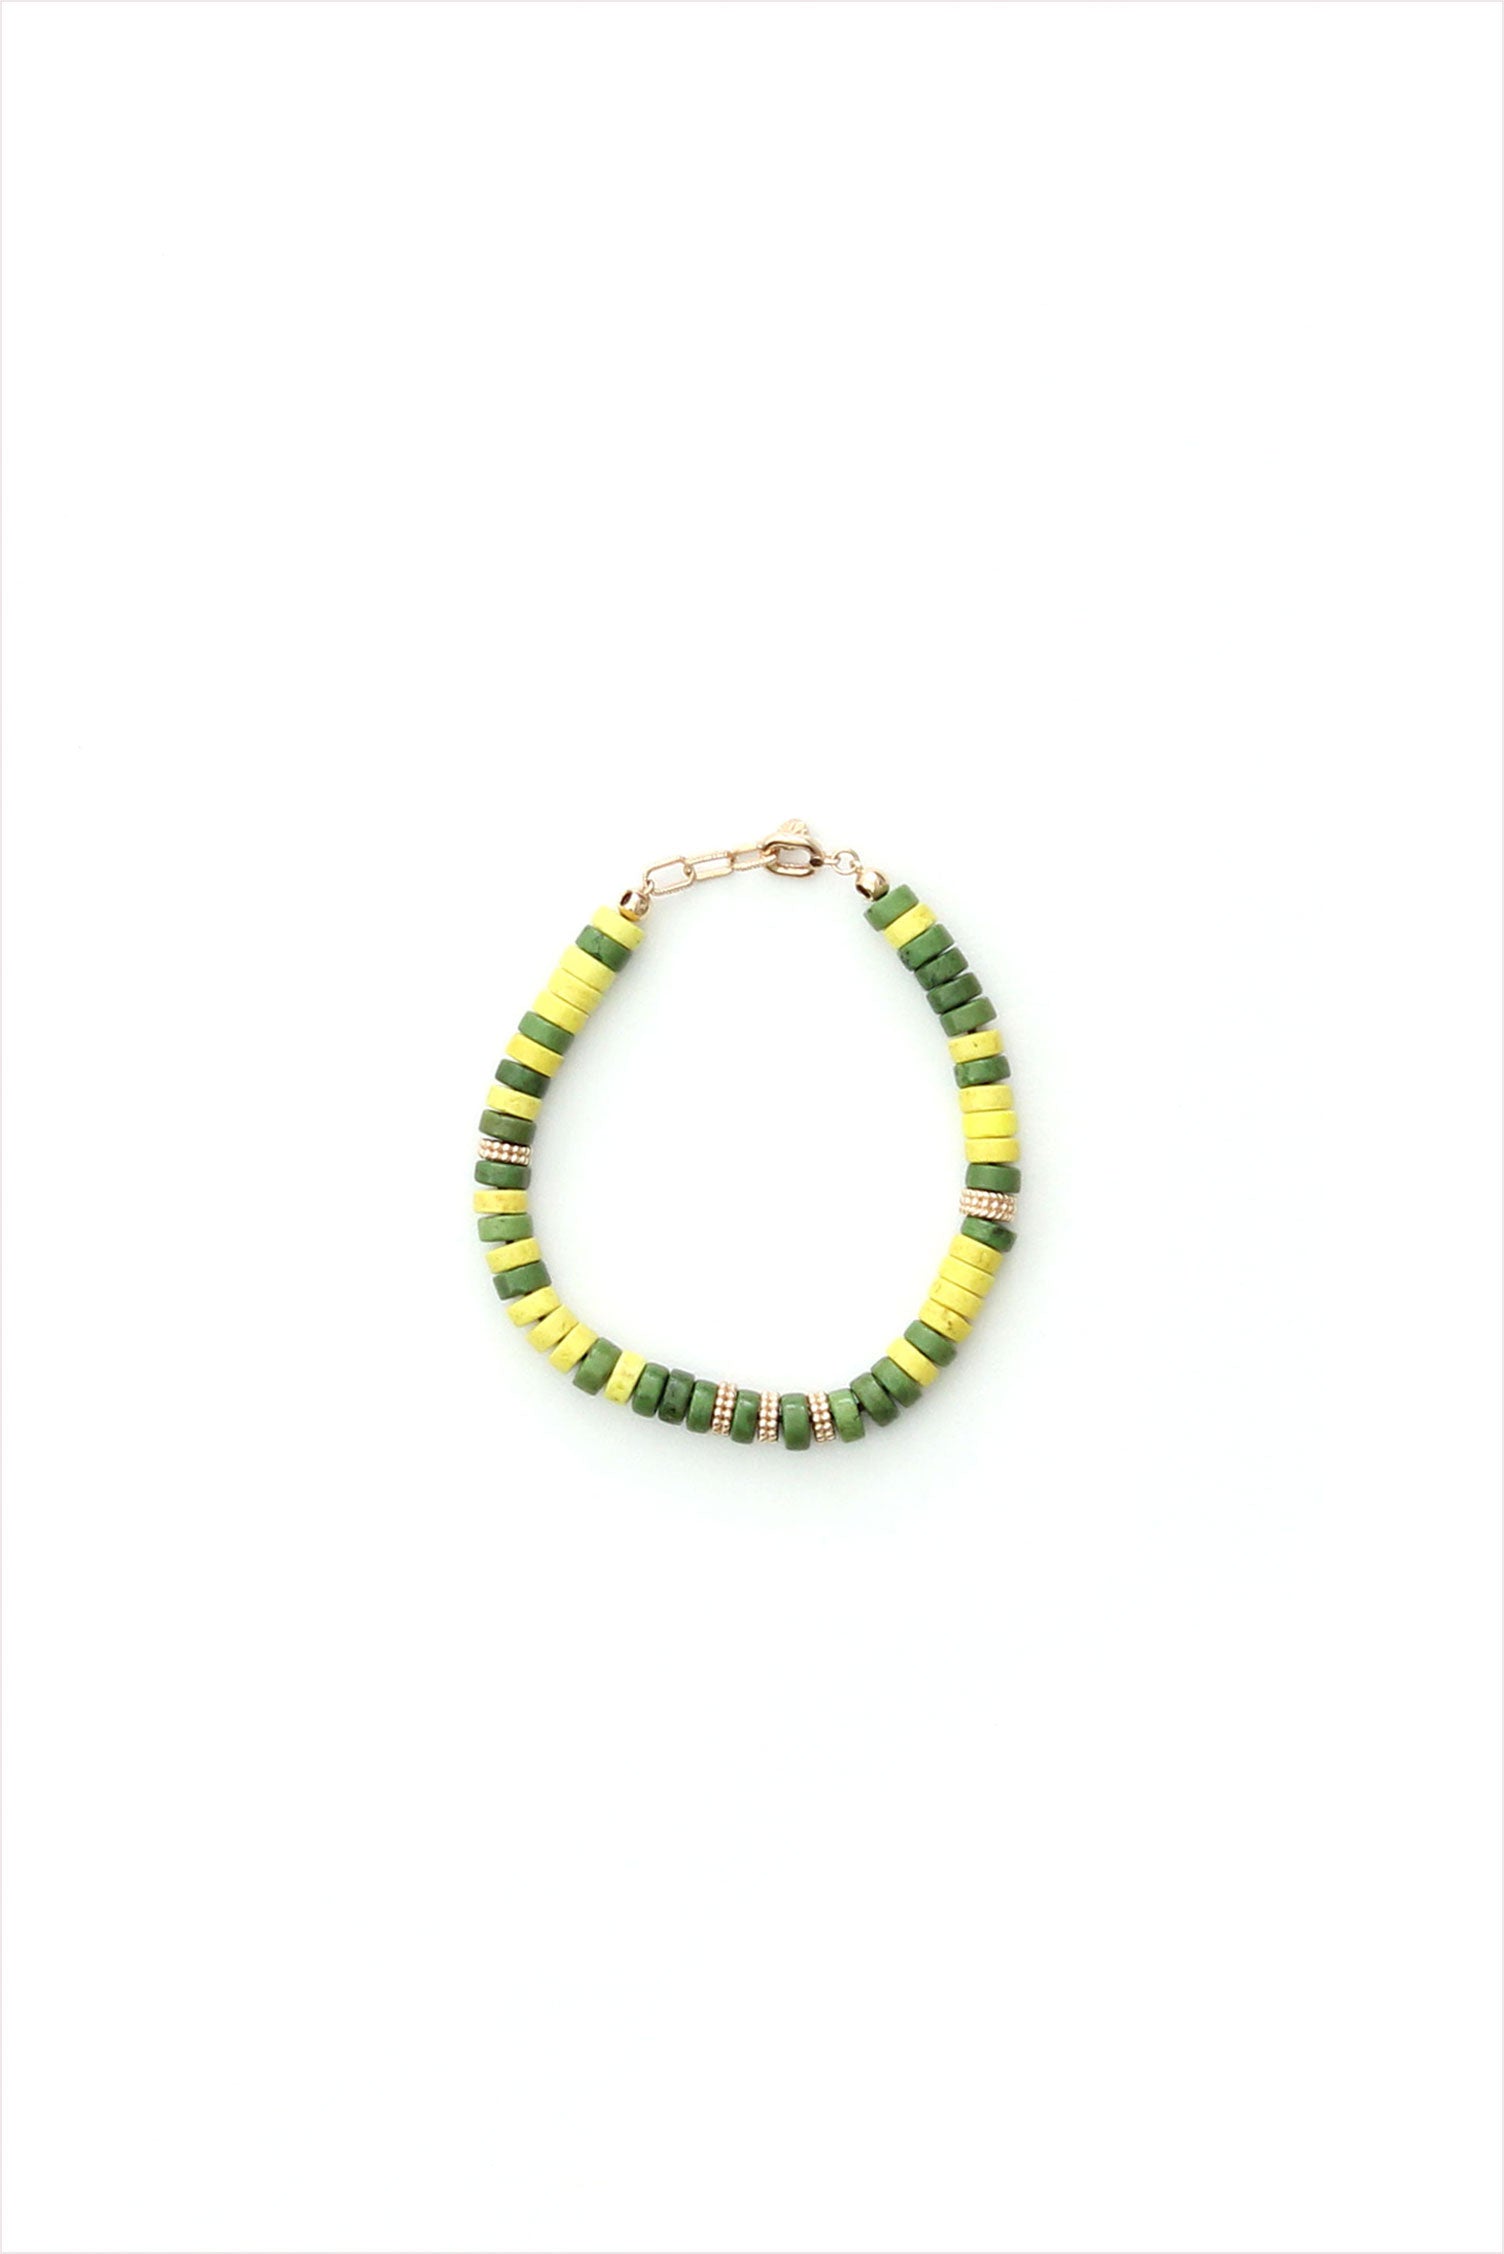 Beaded Bracelet Yellow And Green Turquoise Yellow Gold